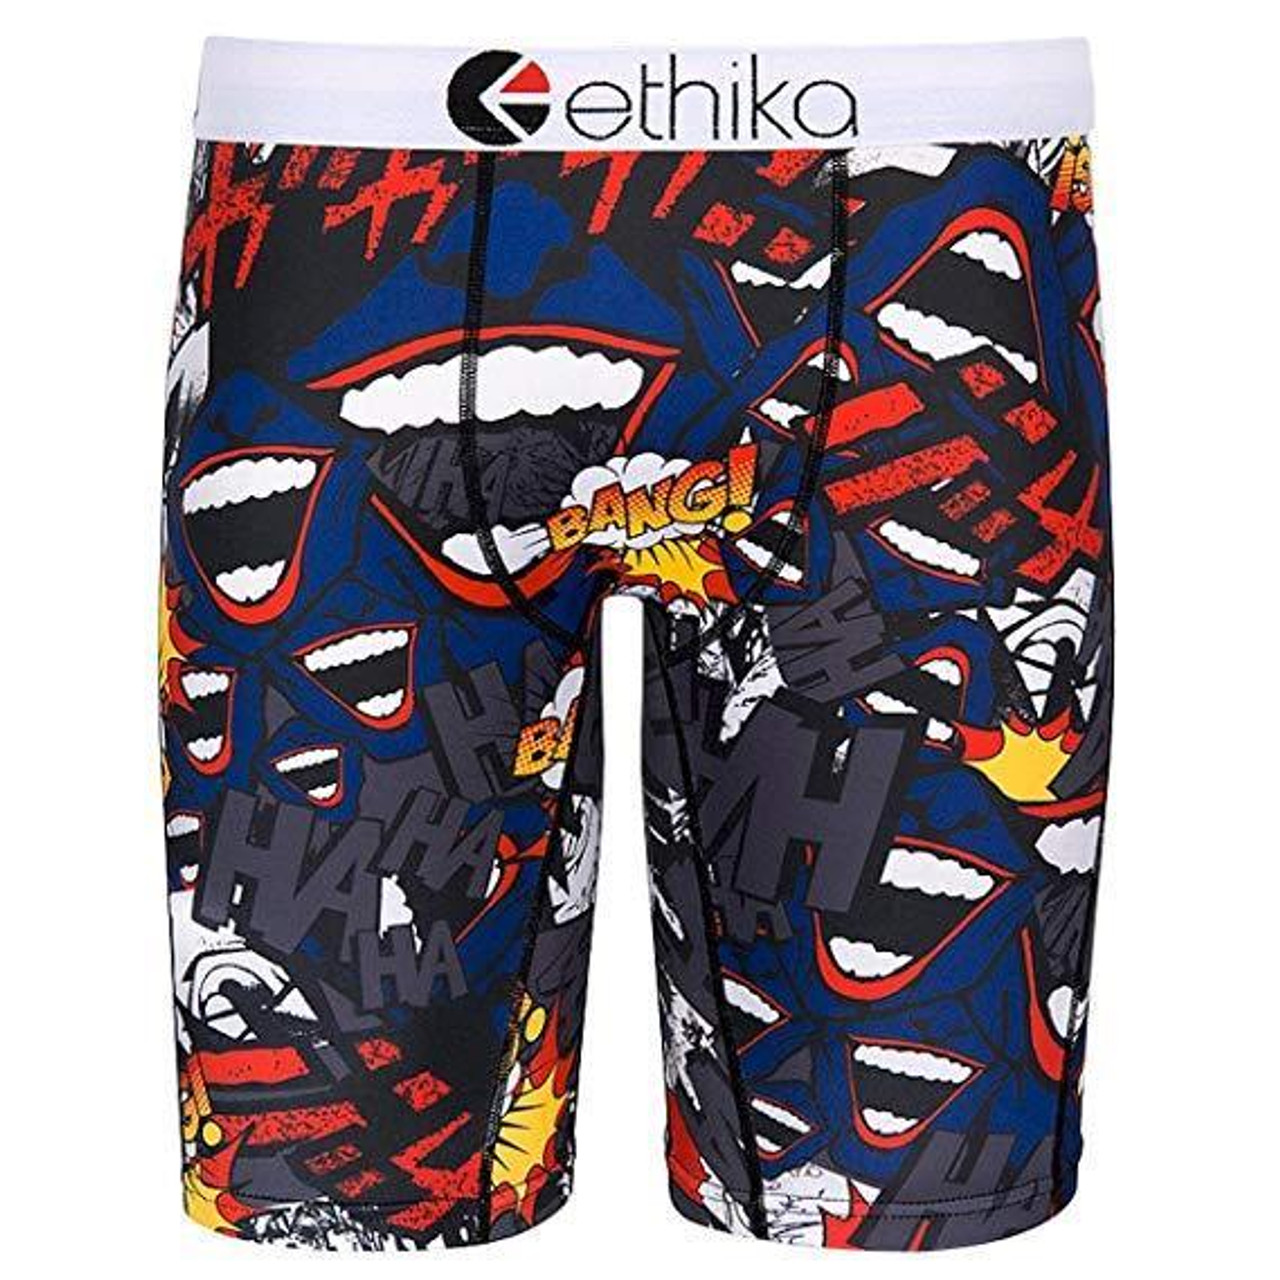 LIMITED EDITION @ethika underwear available now only through Pro